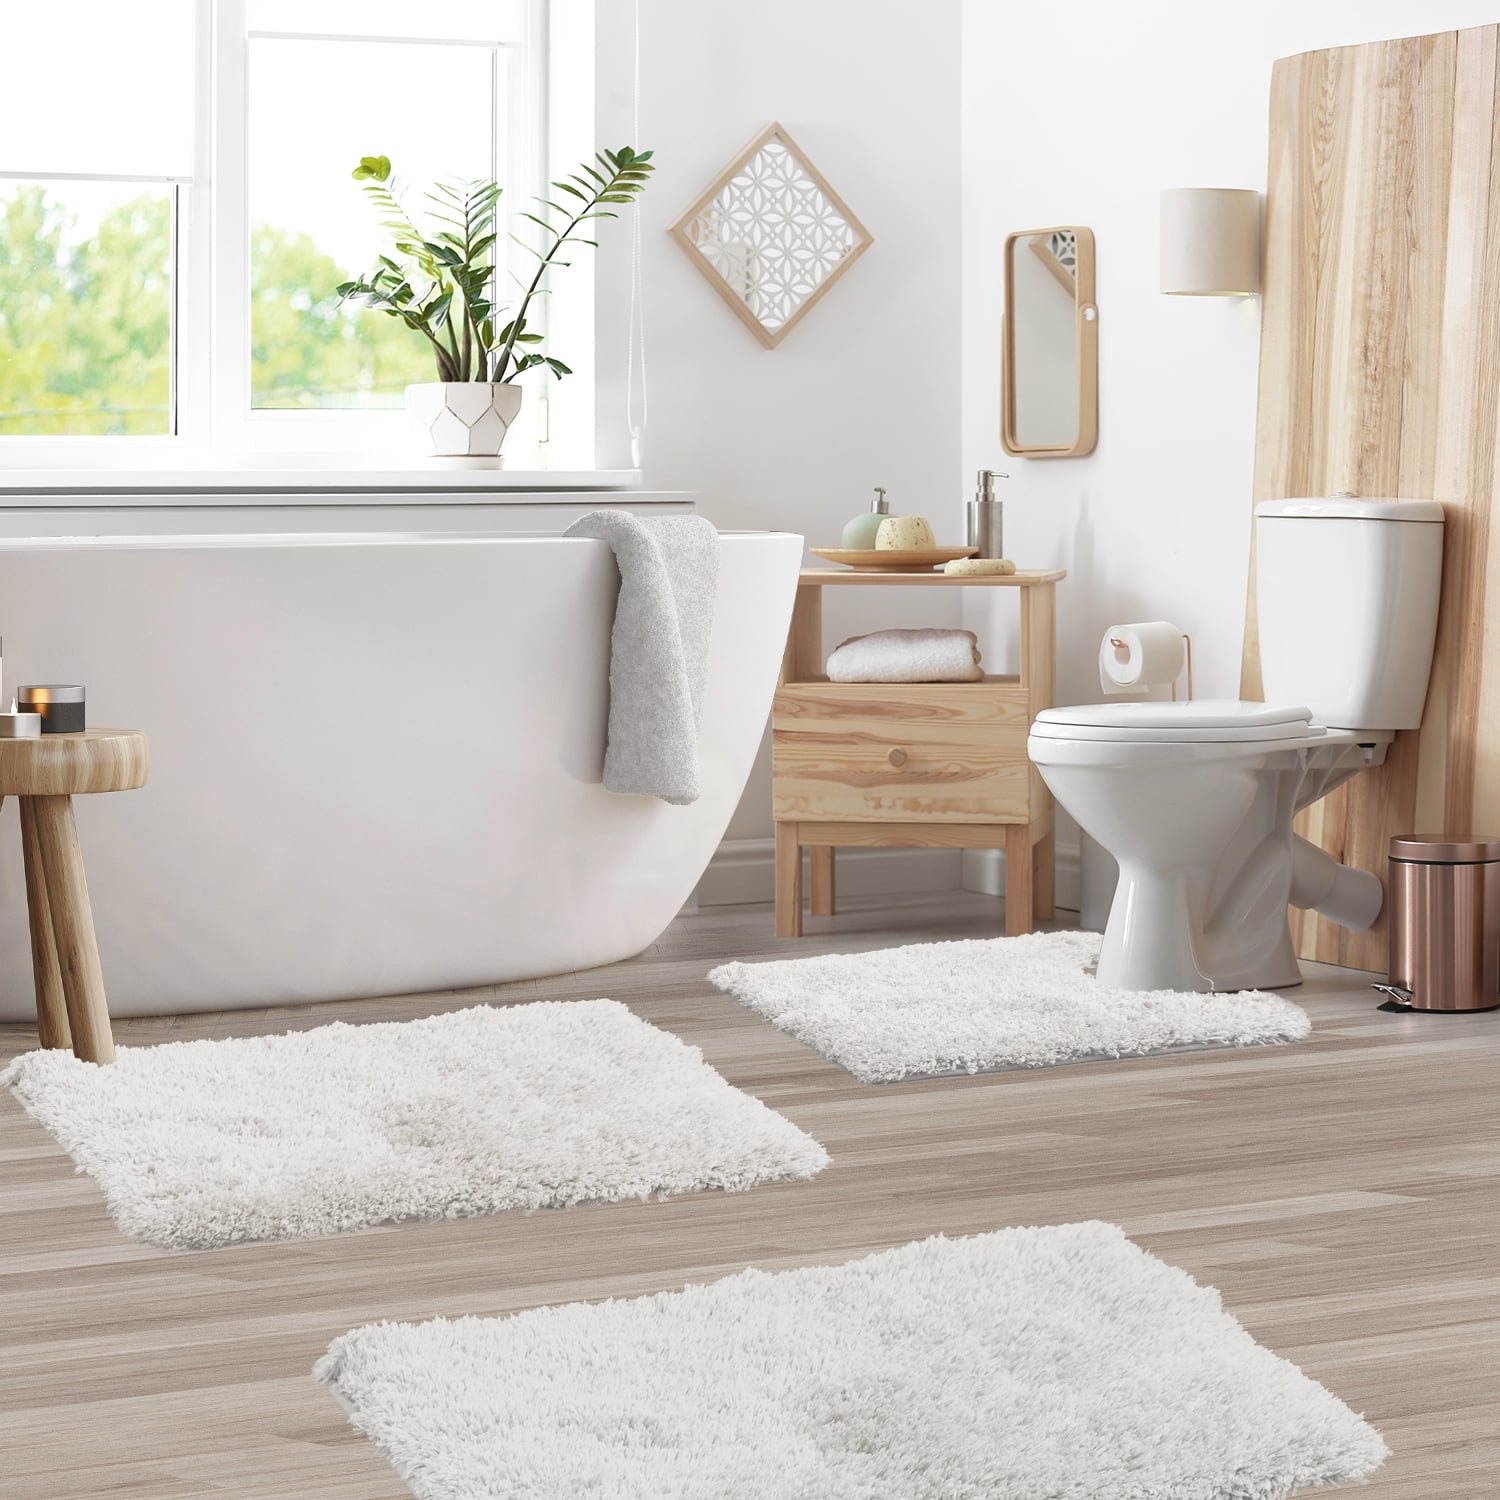 6 different styles of backing for bathroom rugs – Warming and Comforting  Your Home – Committed to Every Thread